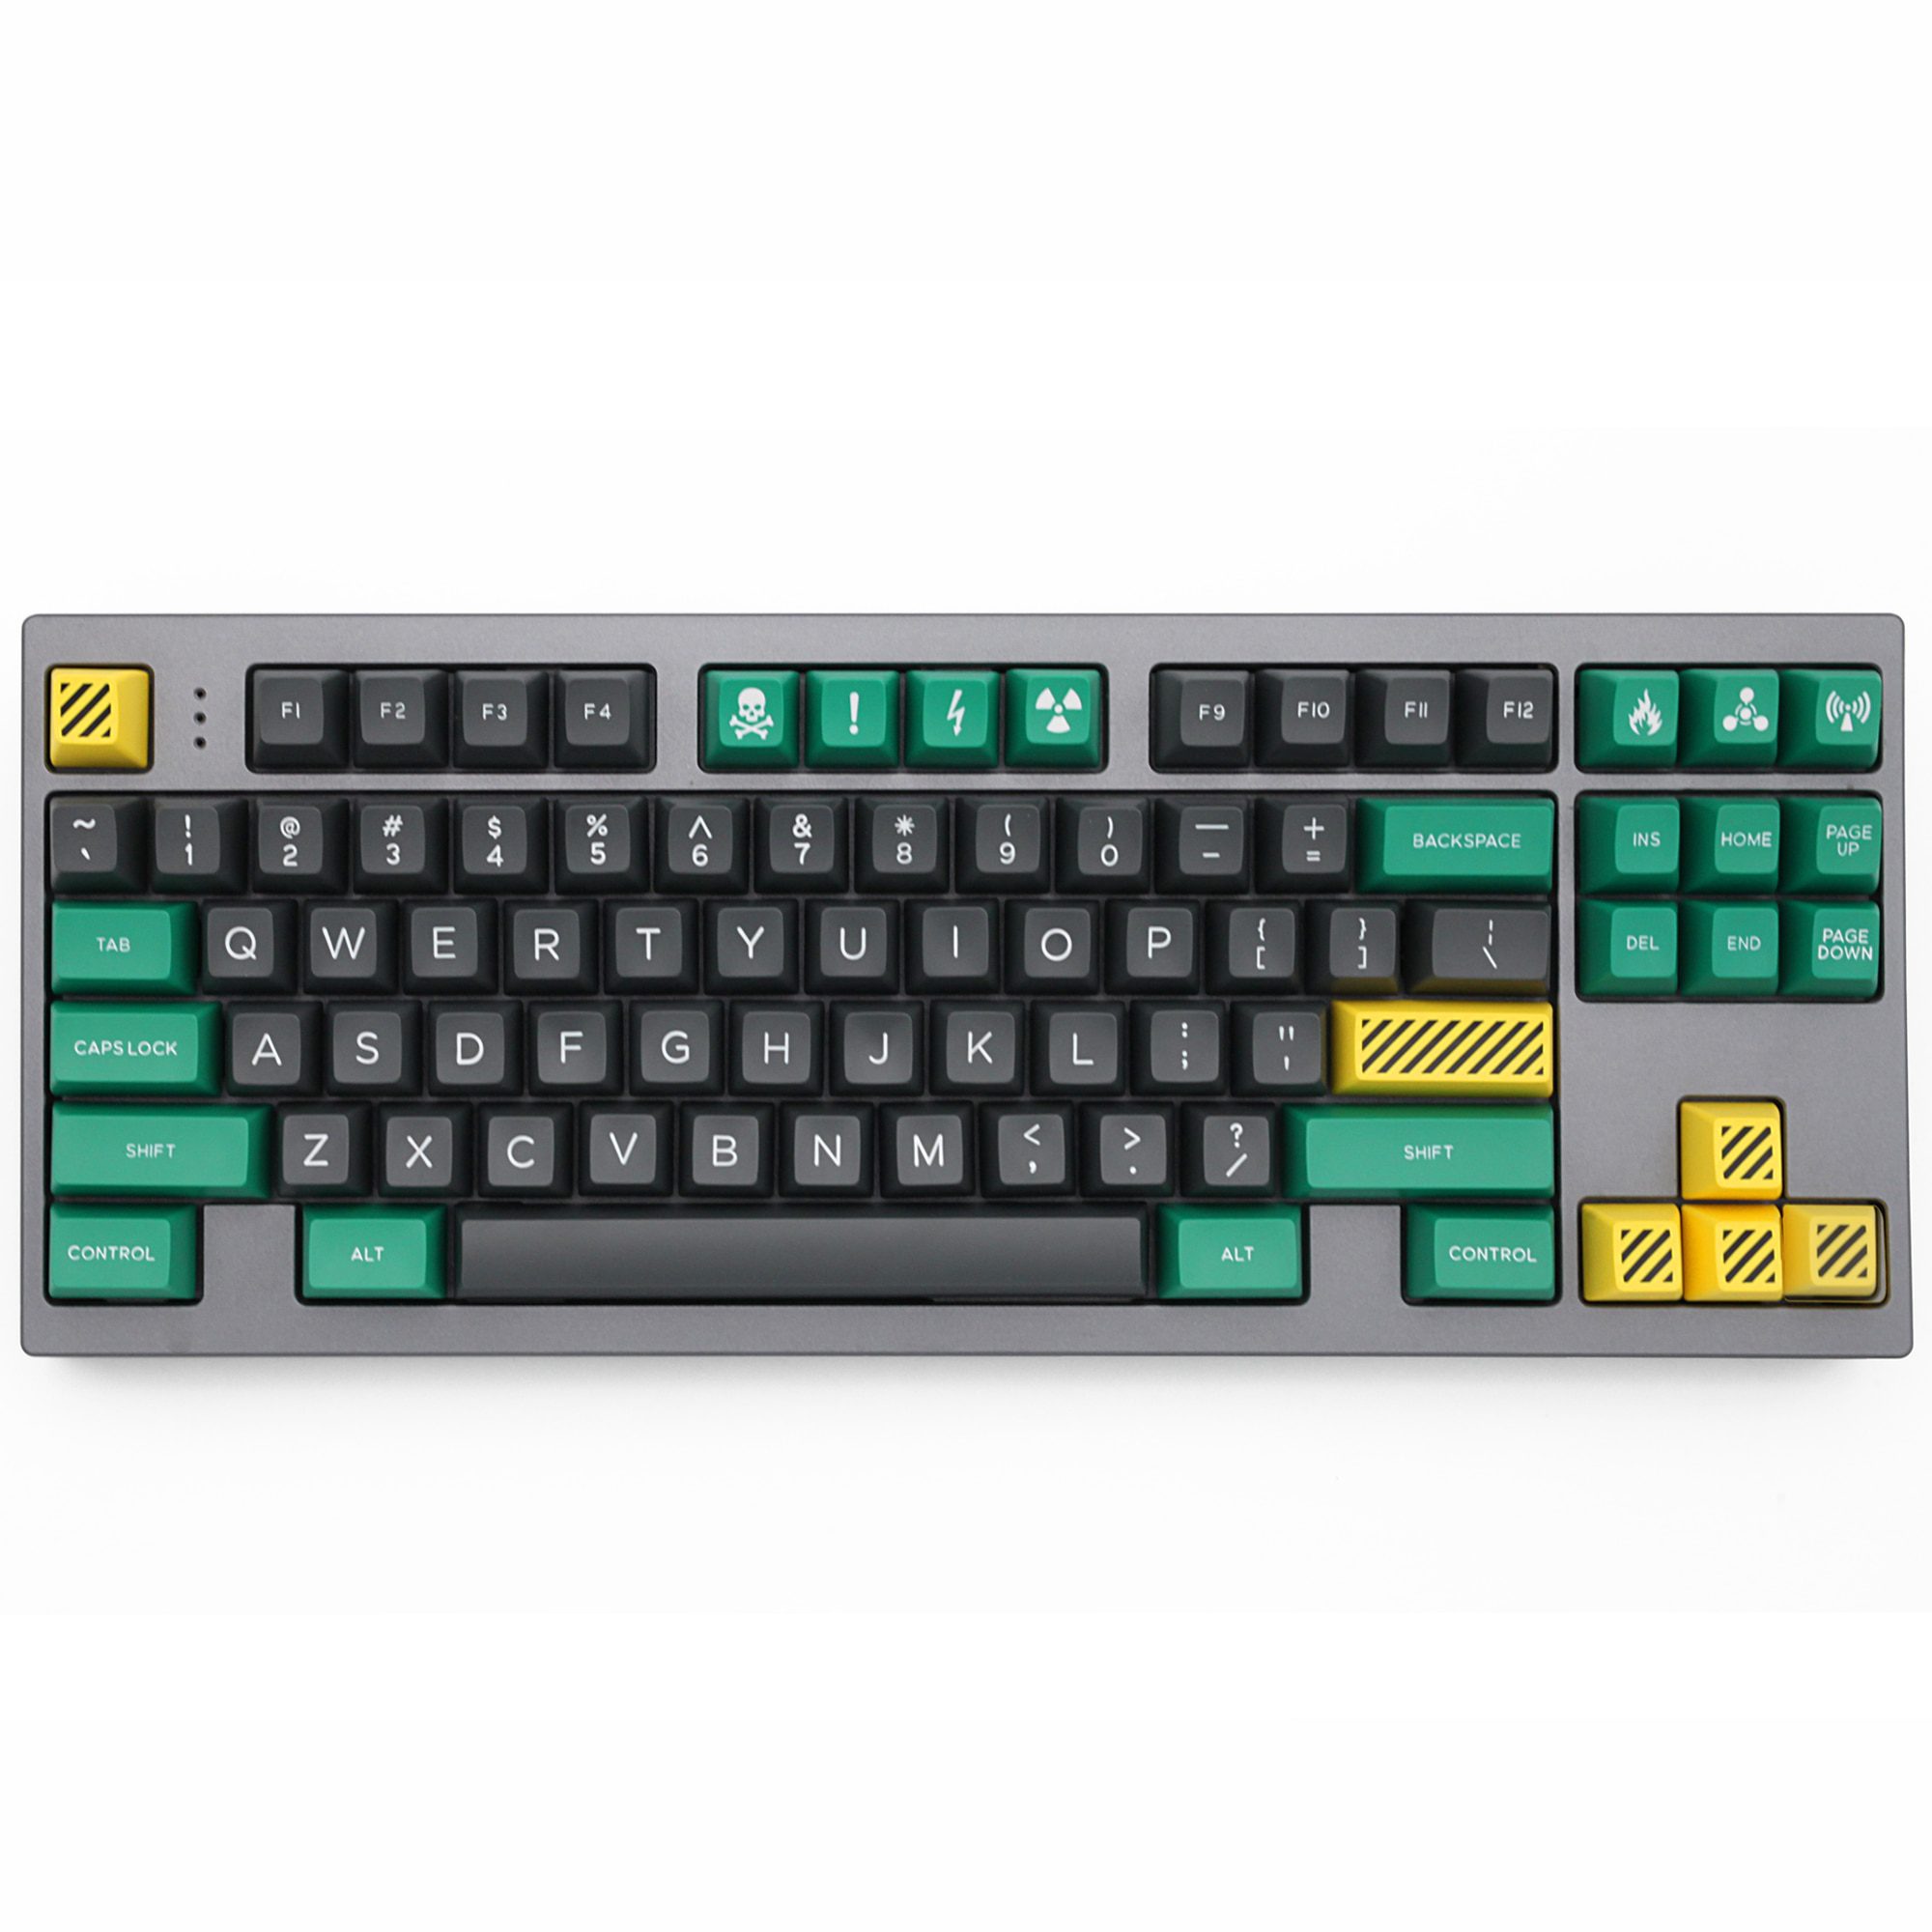 DNA65 65% Custom Mechanical Keyboard Kit PCB CASE hot swappable switch support lighting effects with RGB switch led